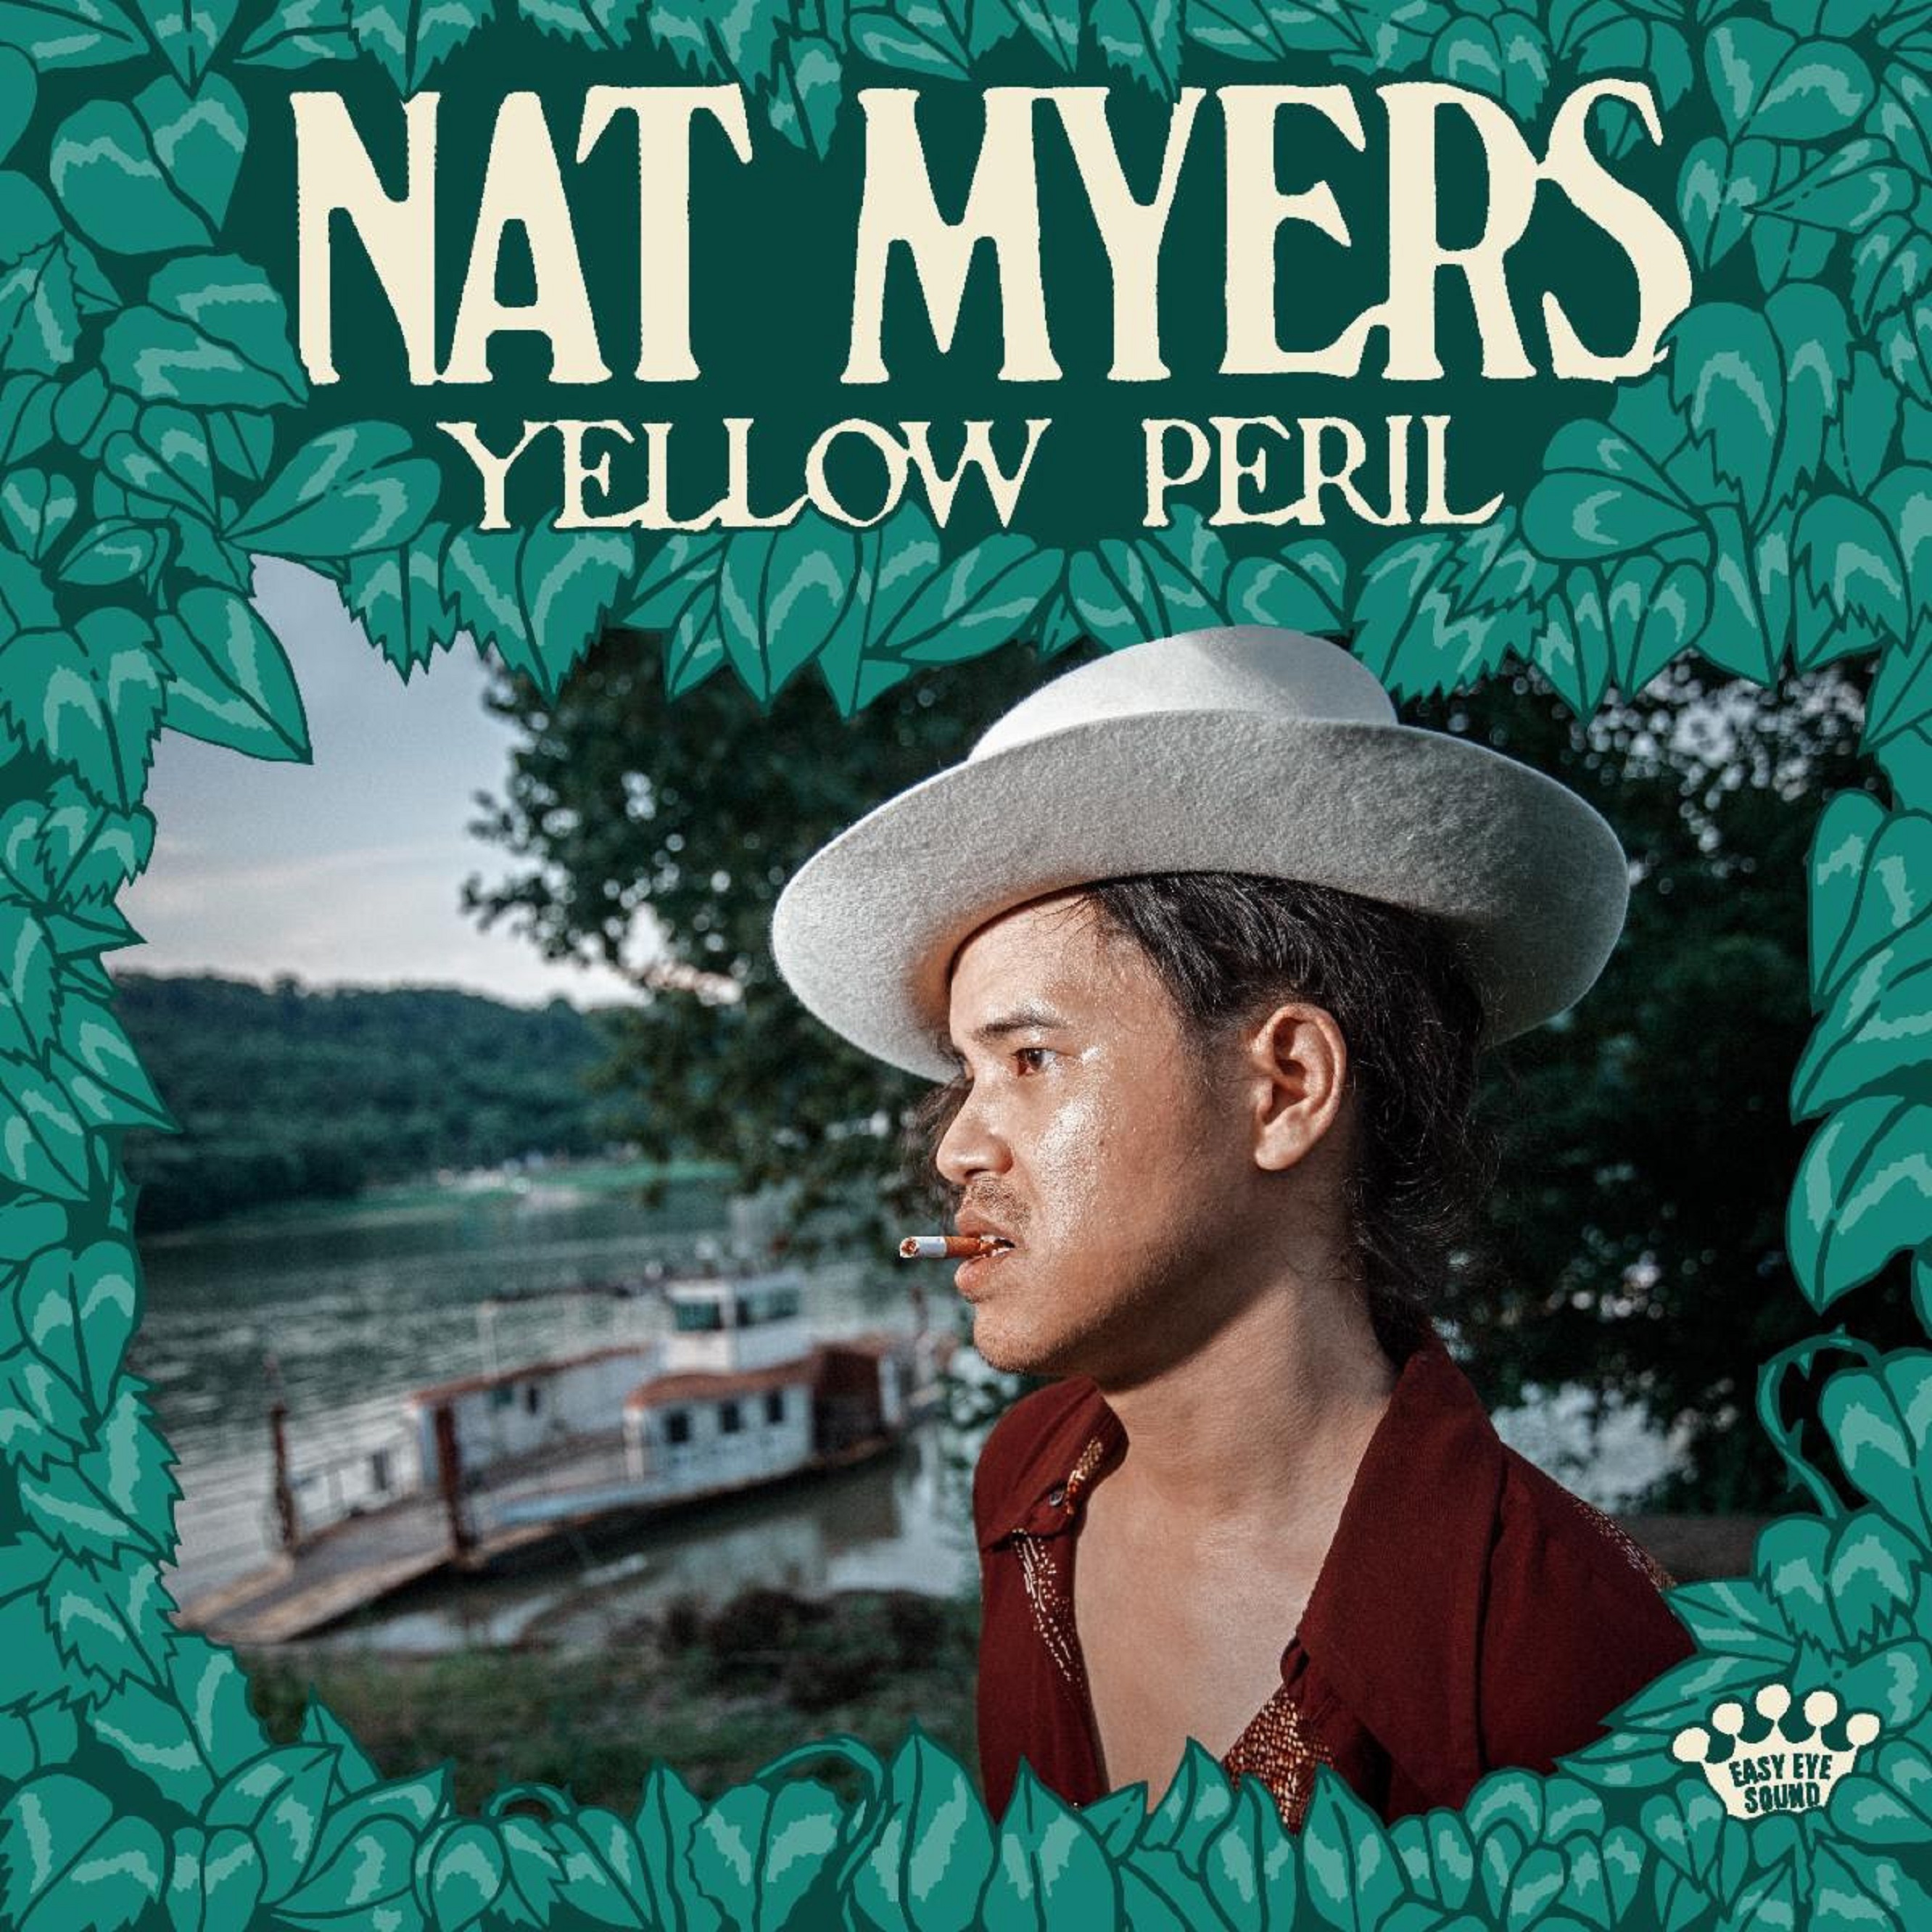 Nat Myers uses blistering back-porch blues to confront "Yellow Peril" on his Dan Auerbach-produced debut